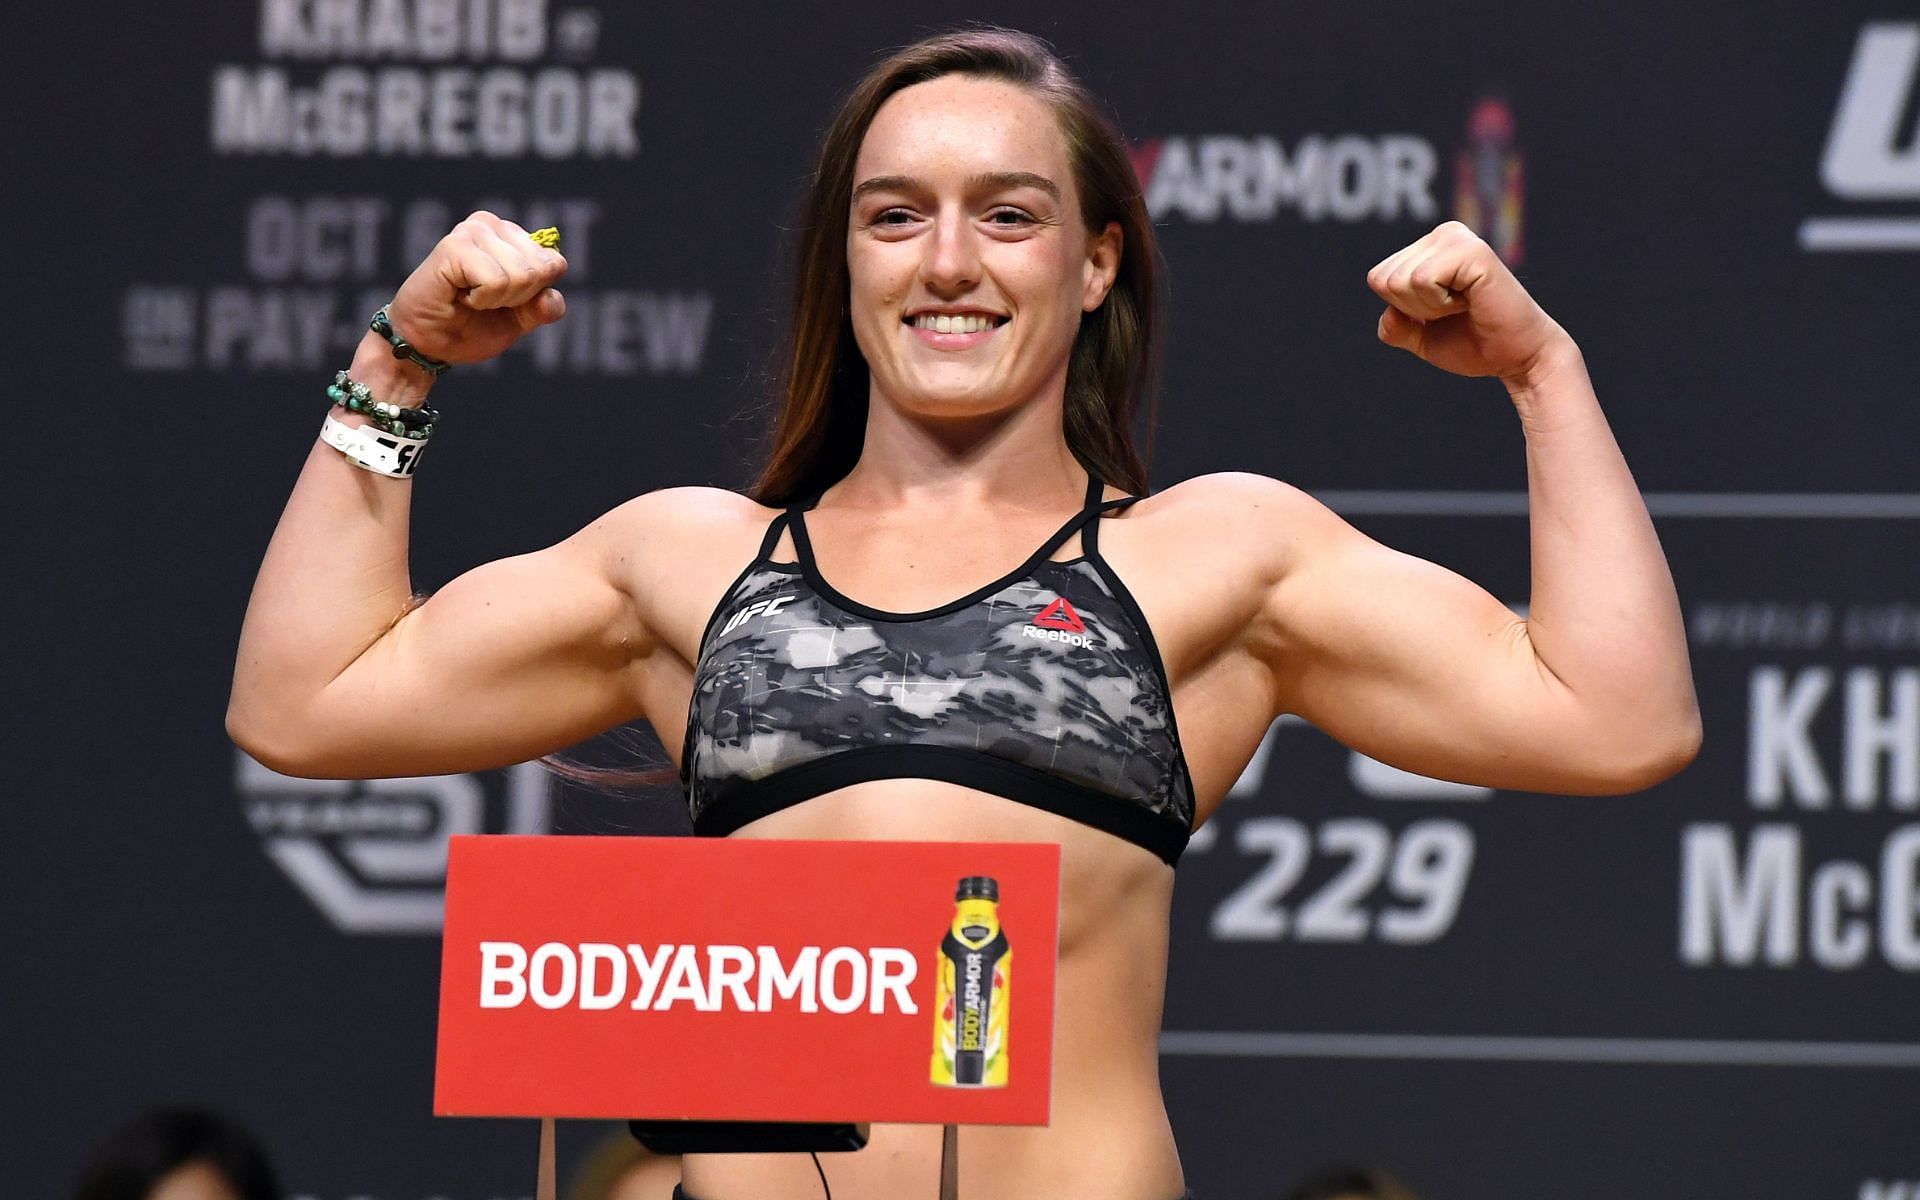 Aspen Ladd has competed at flyweight, bantamweight, and featherweight in her professional MMA career